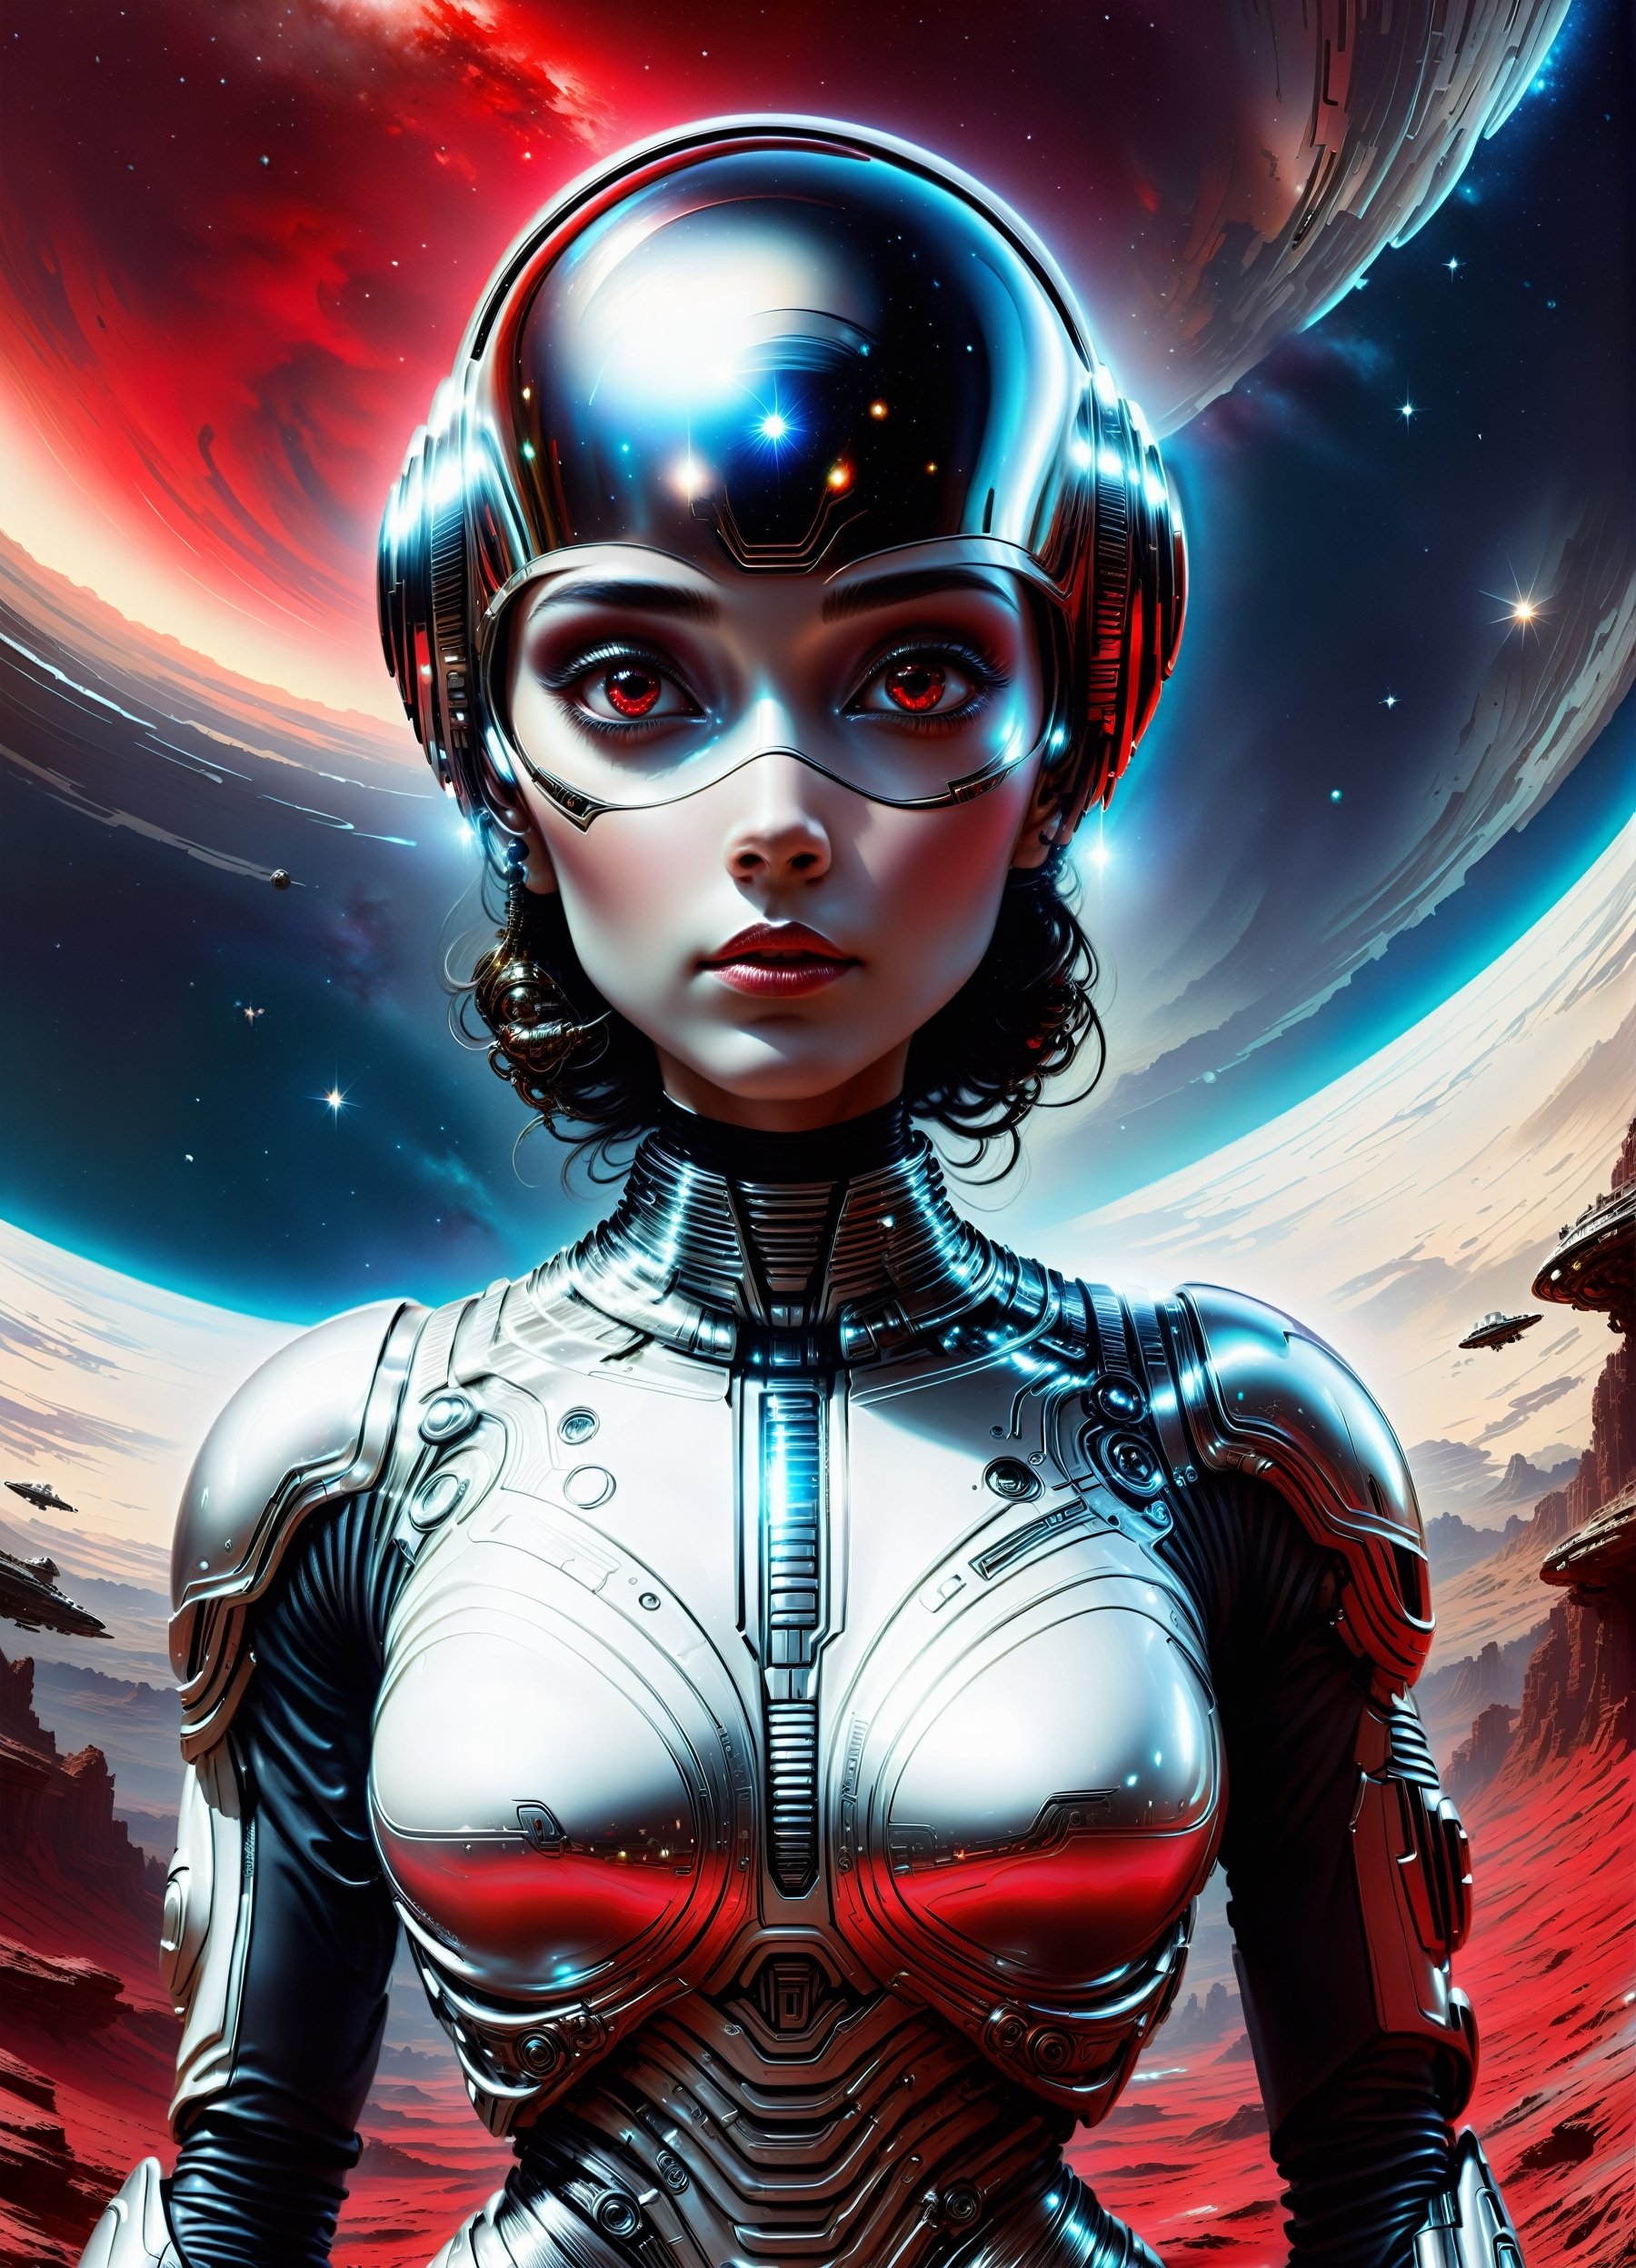 A futuristic femme fatale donning a sleek white jumpsuit, her piercing gaze locked on the horizon, as a red and black spaceship soars into the crimson-hued sky. In front of her, a metallic backdrop glimmers with silver and red hues, while in the distance, a megastructure's towering presence dominates the landscape. The AI astronaut's skeletal visage peers out from beneath her helmet, her cybernetic eyes gleaming like polished chrome. With Frank Frazetta's bold brushstrokes and Sakimichan's intricate details, this portrait of an android beauty shines like a star in the vast expanse.,chrometech,Tech